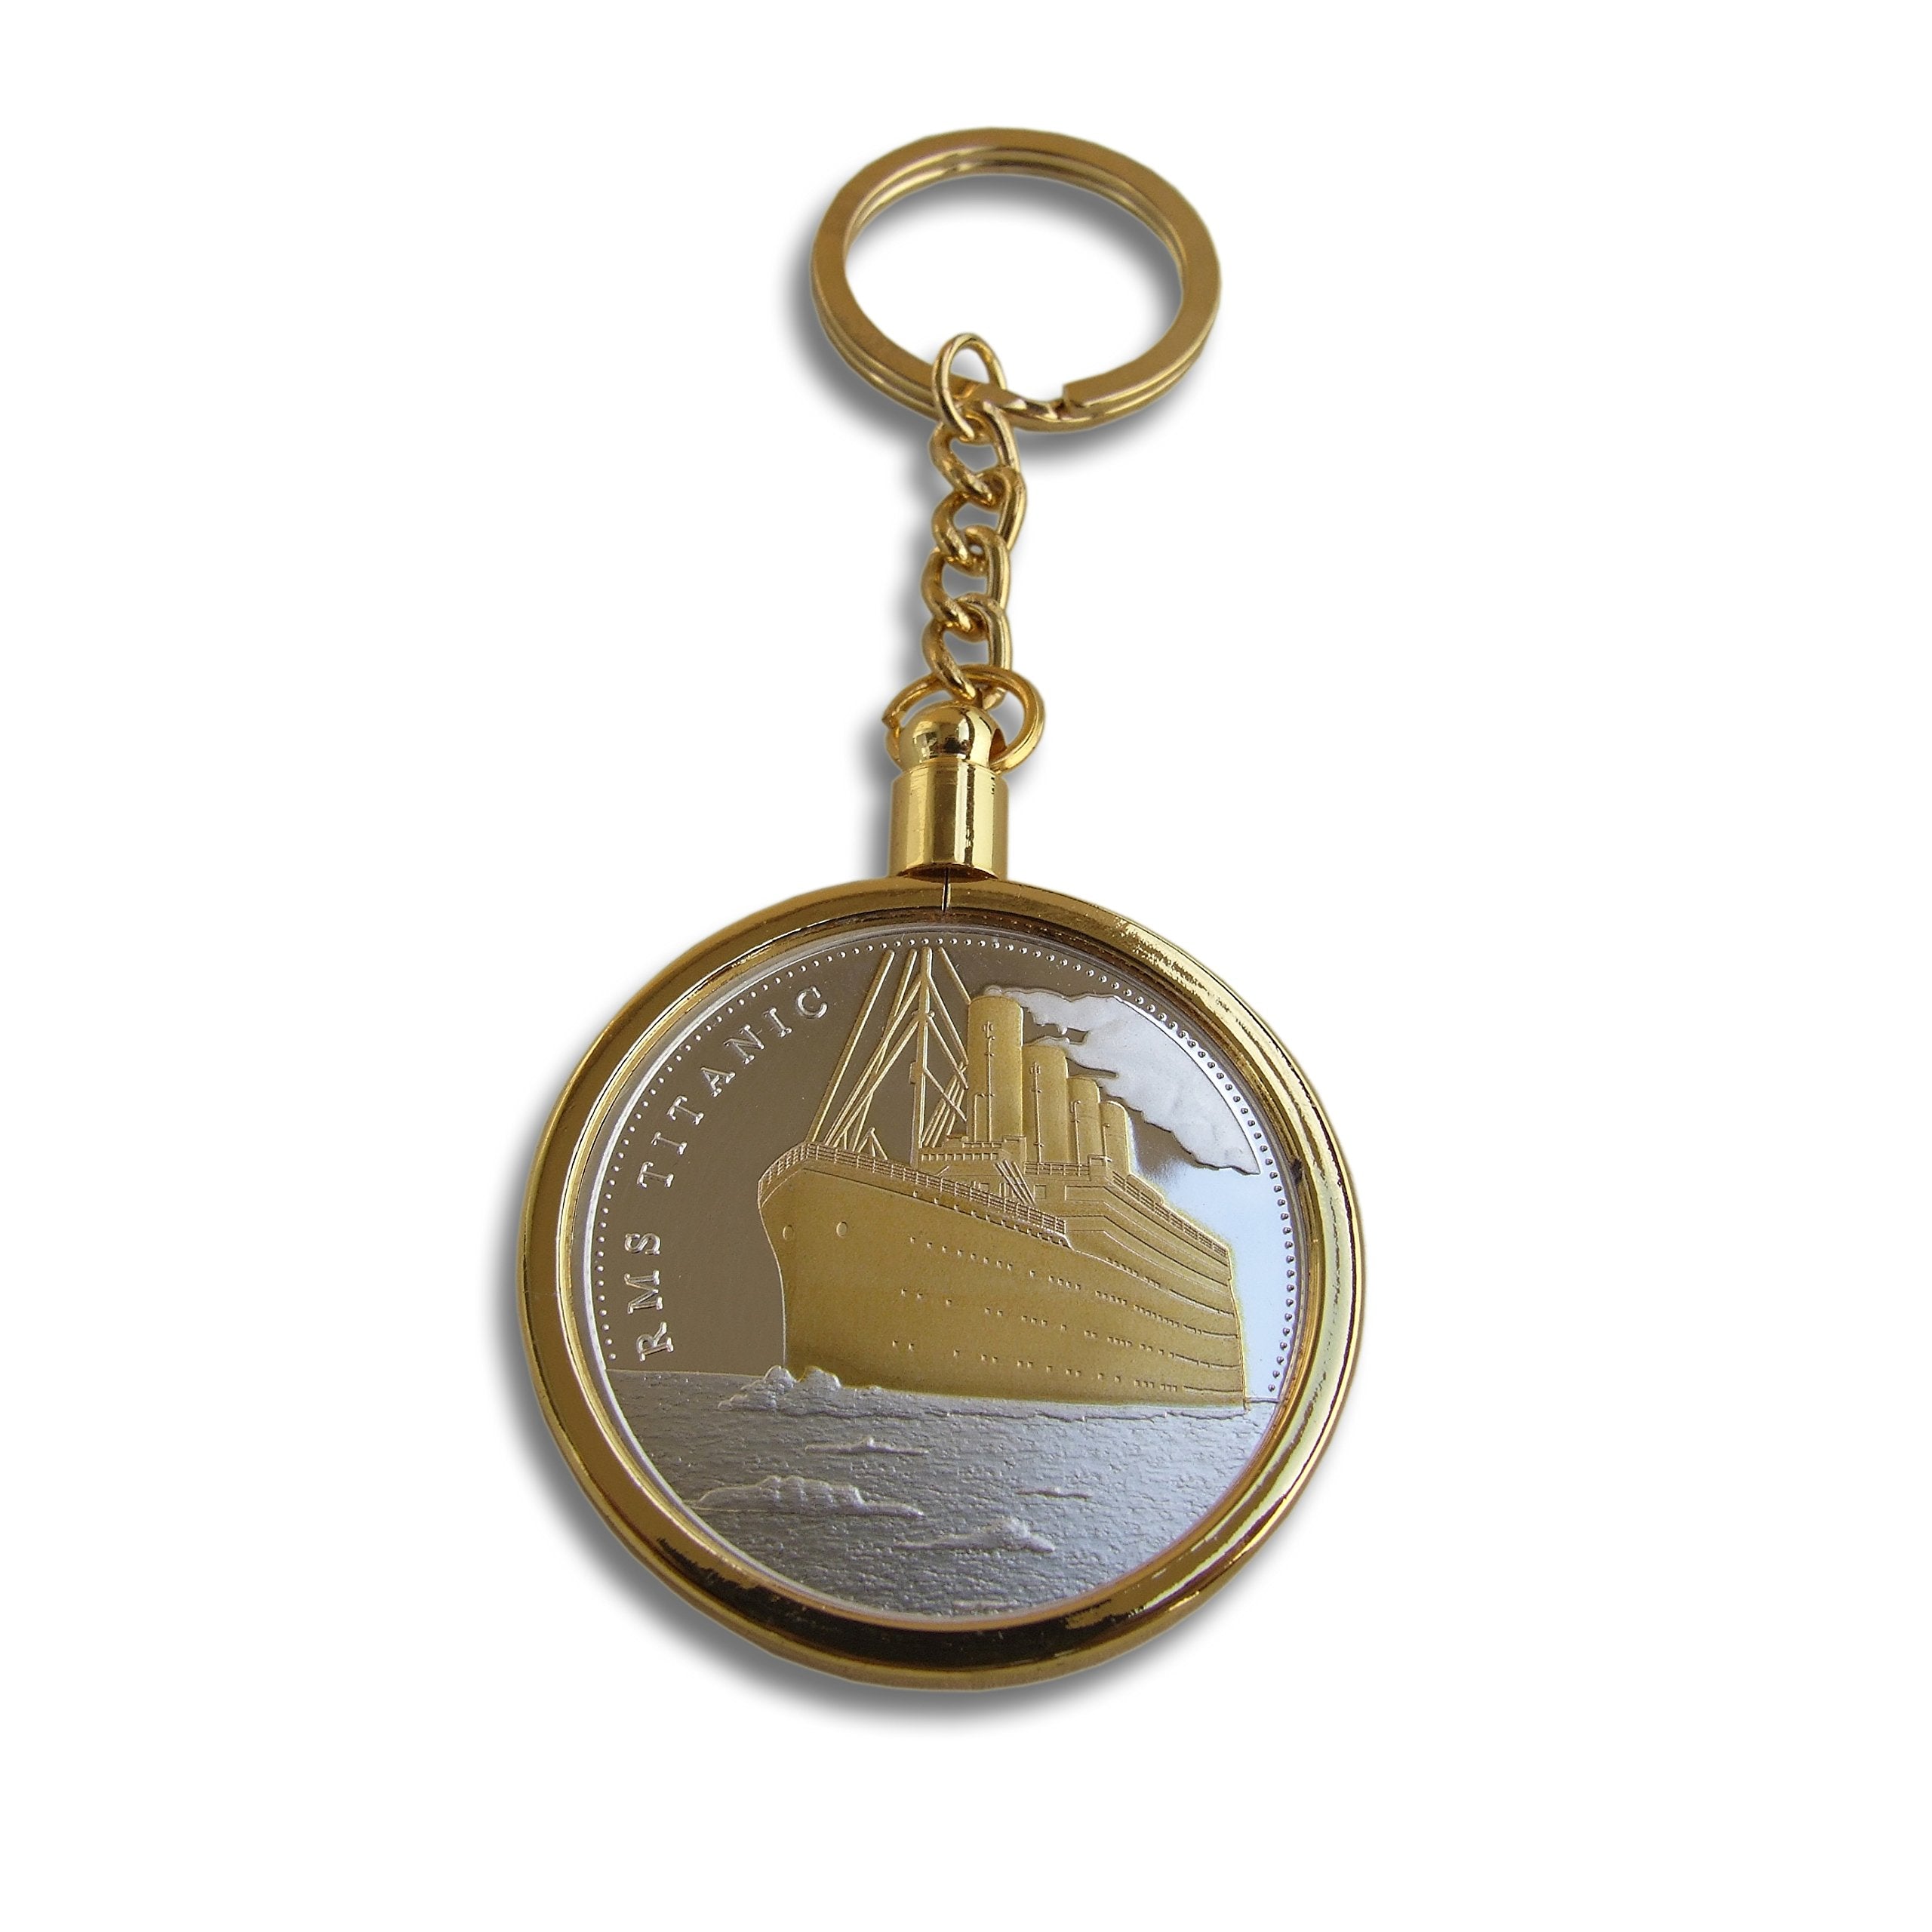 TROPRO RMS TITANIC Keychain Locket 100 Year Anniversary Edition Medallion White Star Line Coin Collectable & Commemorative Token Amulet Rare Keyring Noble Gift